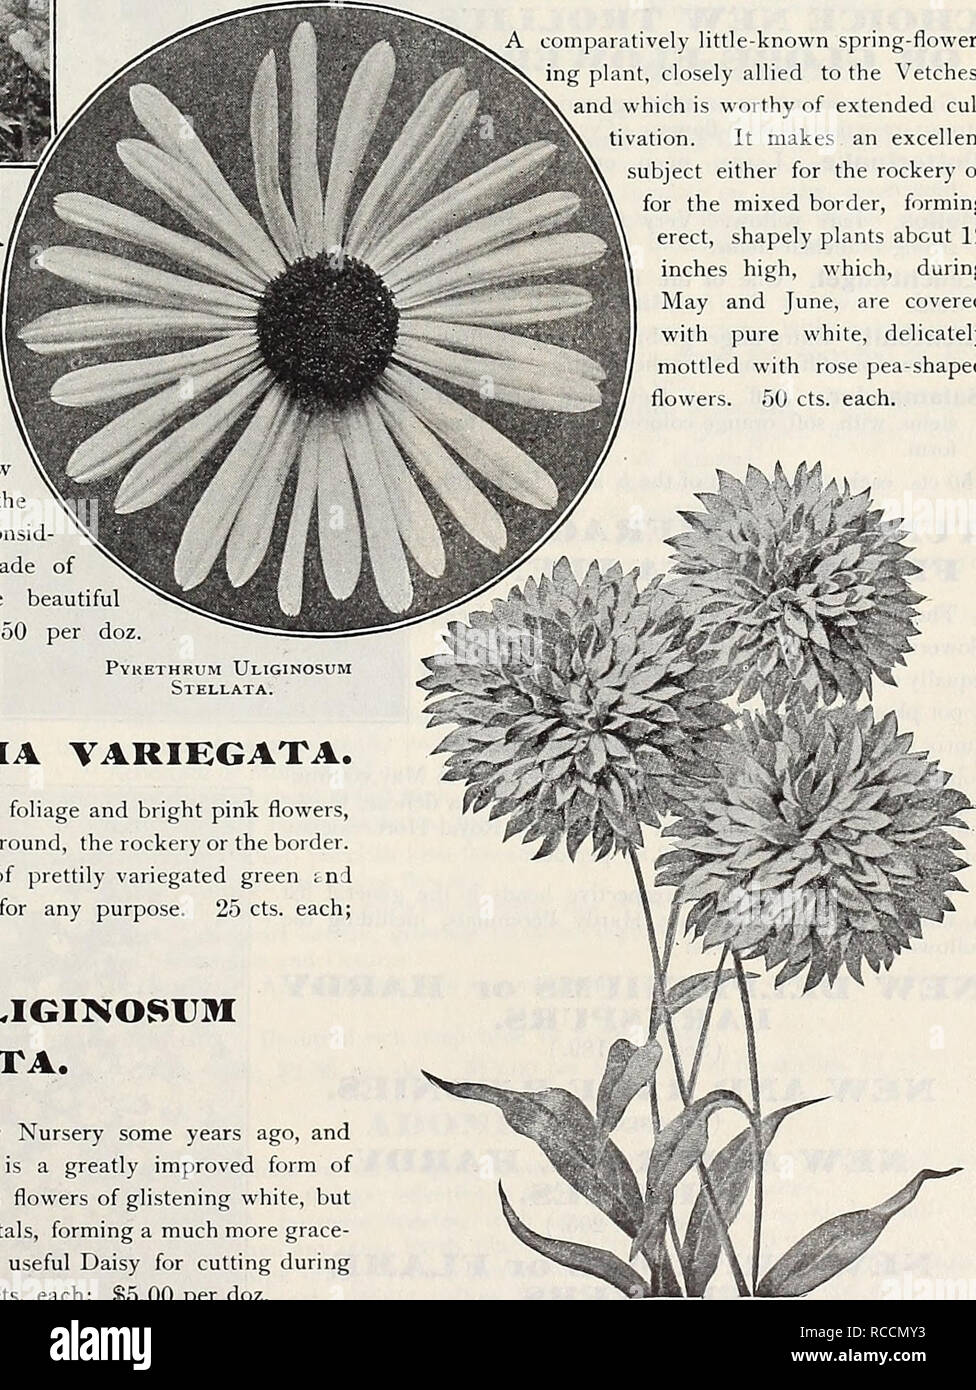 . Dreer's 1909 garden book. Seeds Catalogs; Nursery stock Catalogs; Gardening Equipment and supplies Catalogs; Flowers Seeds Catalogs; Vegetables Seeds Catalogs; Fruit Seeds Catalogs. LuPINUS POLYPHYLLllS ROSEUS. PHLOX DIVARICATA LAPHAMI (Perry's Variety). Phlox devaricata canadensis offered and illustrated on page 207 has long been a favorite plant for the border and rockery, and deservedly so, it being a free-flow- ering, showy plant, adapting itself to almost any soil and position. In this new variety we have a great improvement, the plant being more robust, the flowers consid erably larger Stock Photo